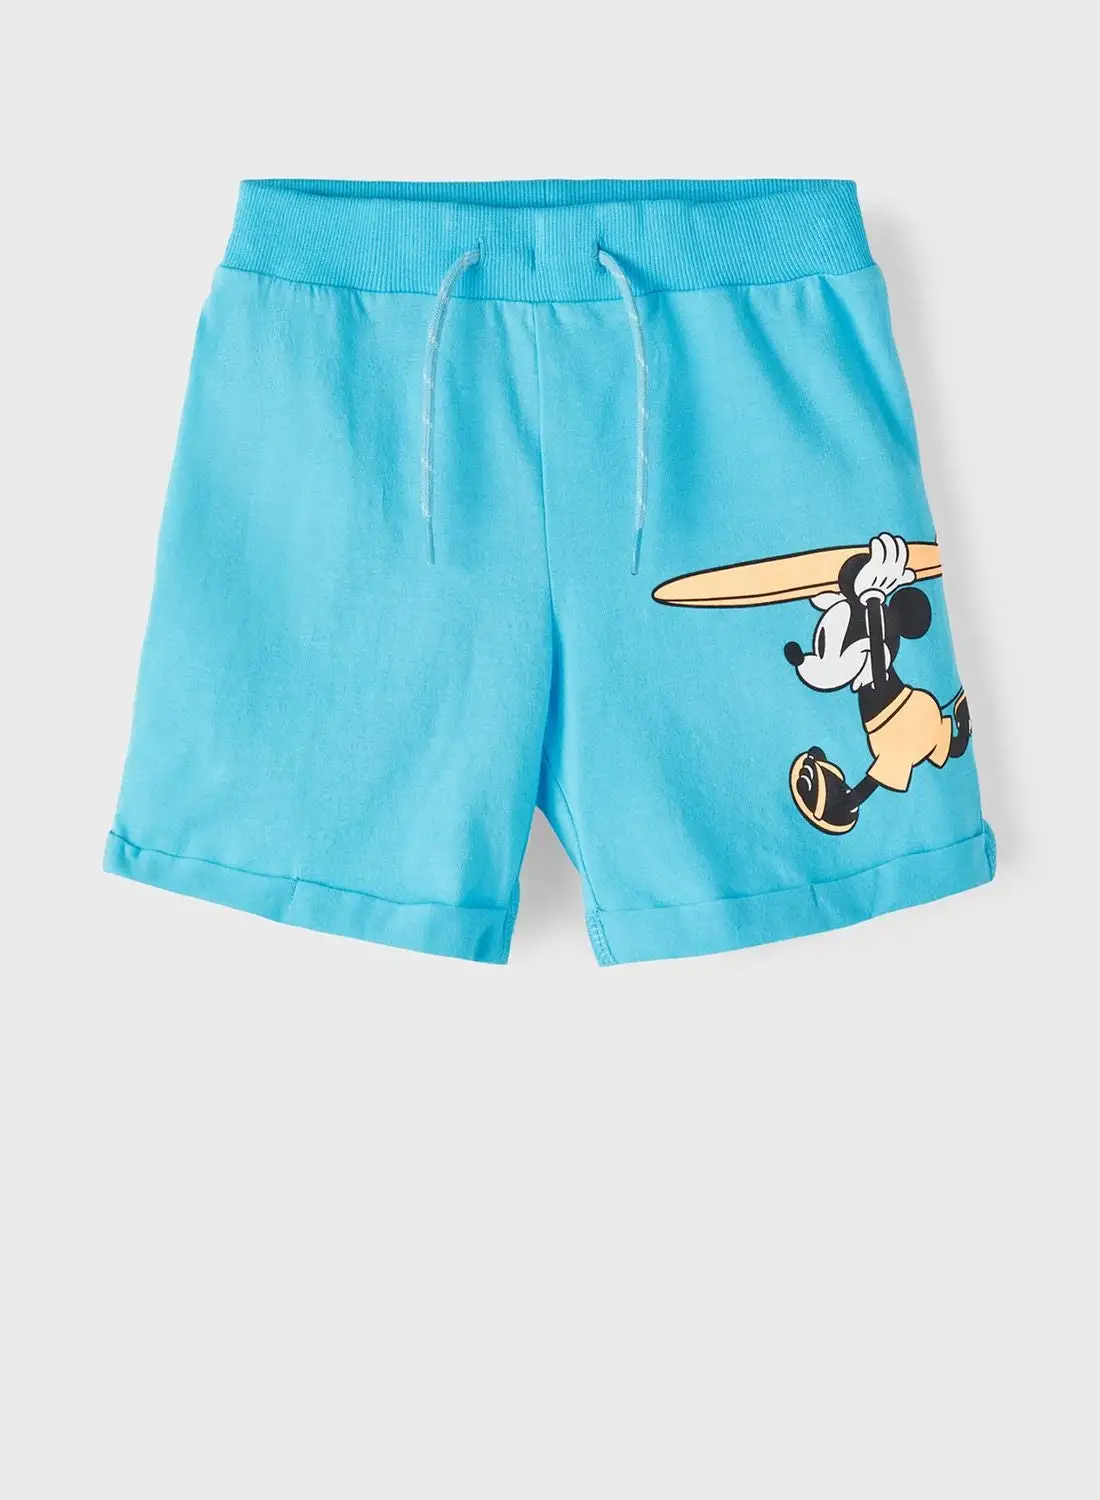 NAME IT Kids Graphic Shorts